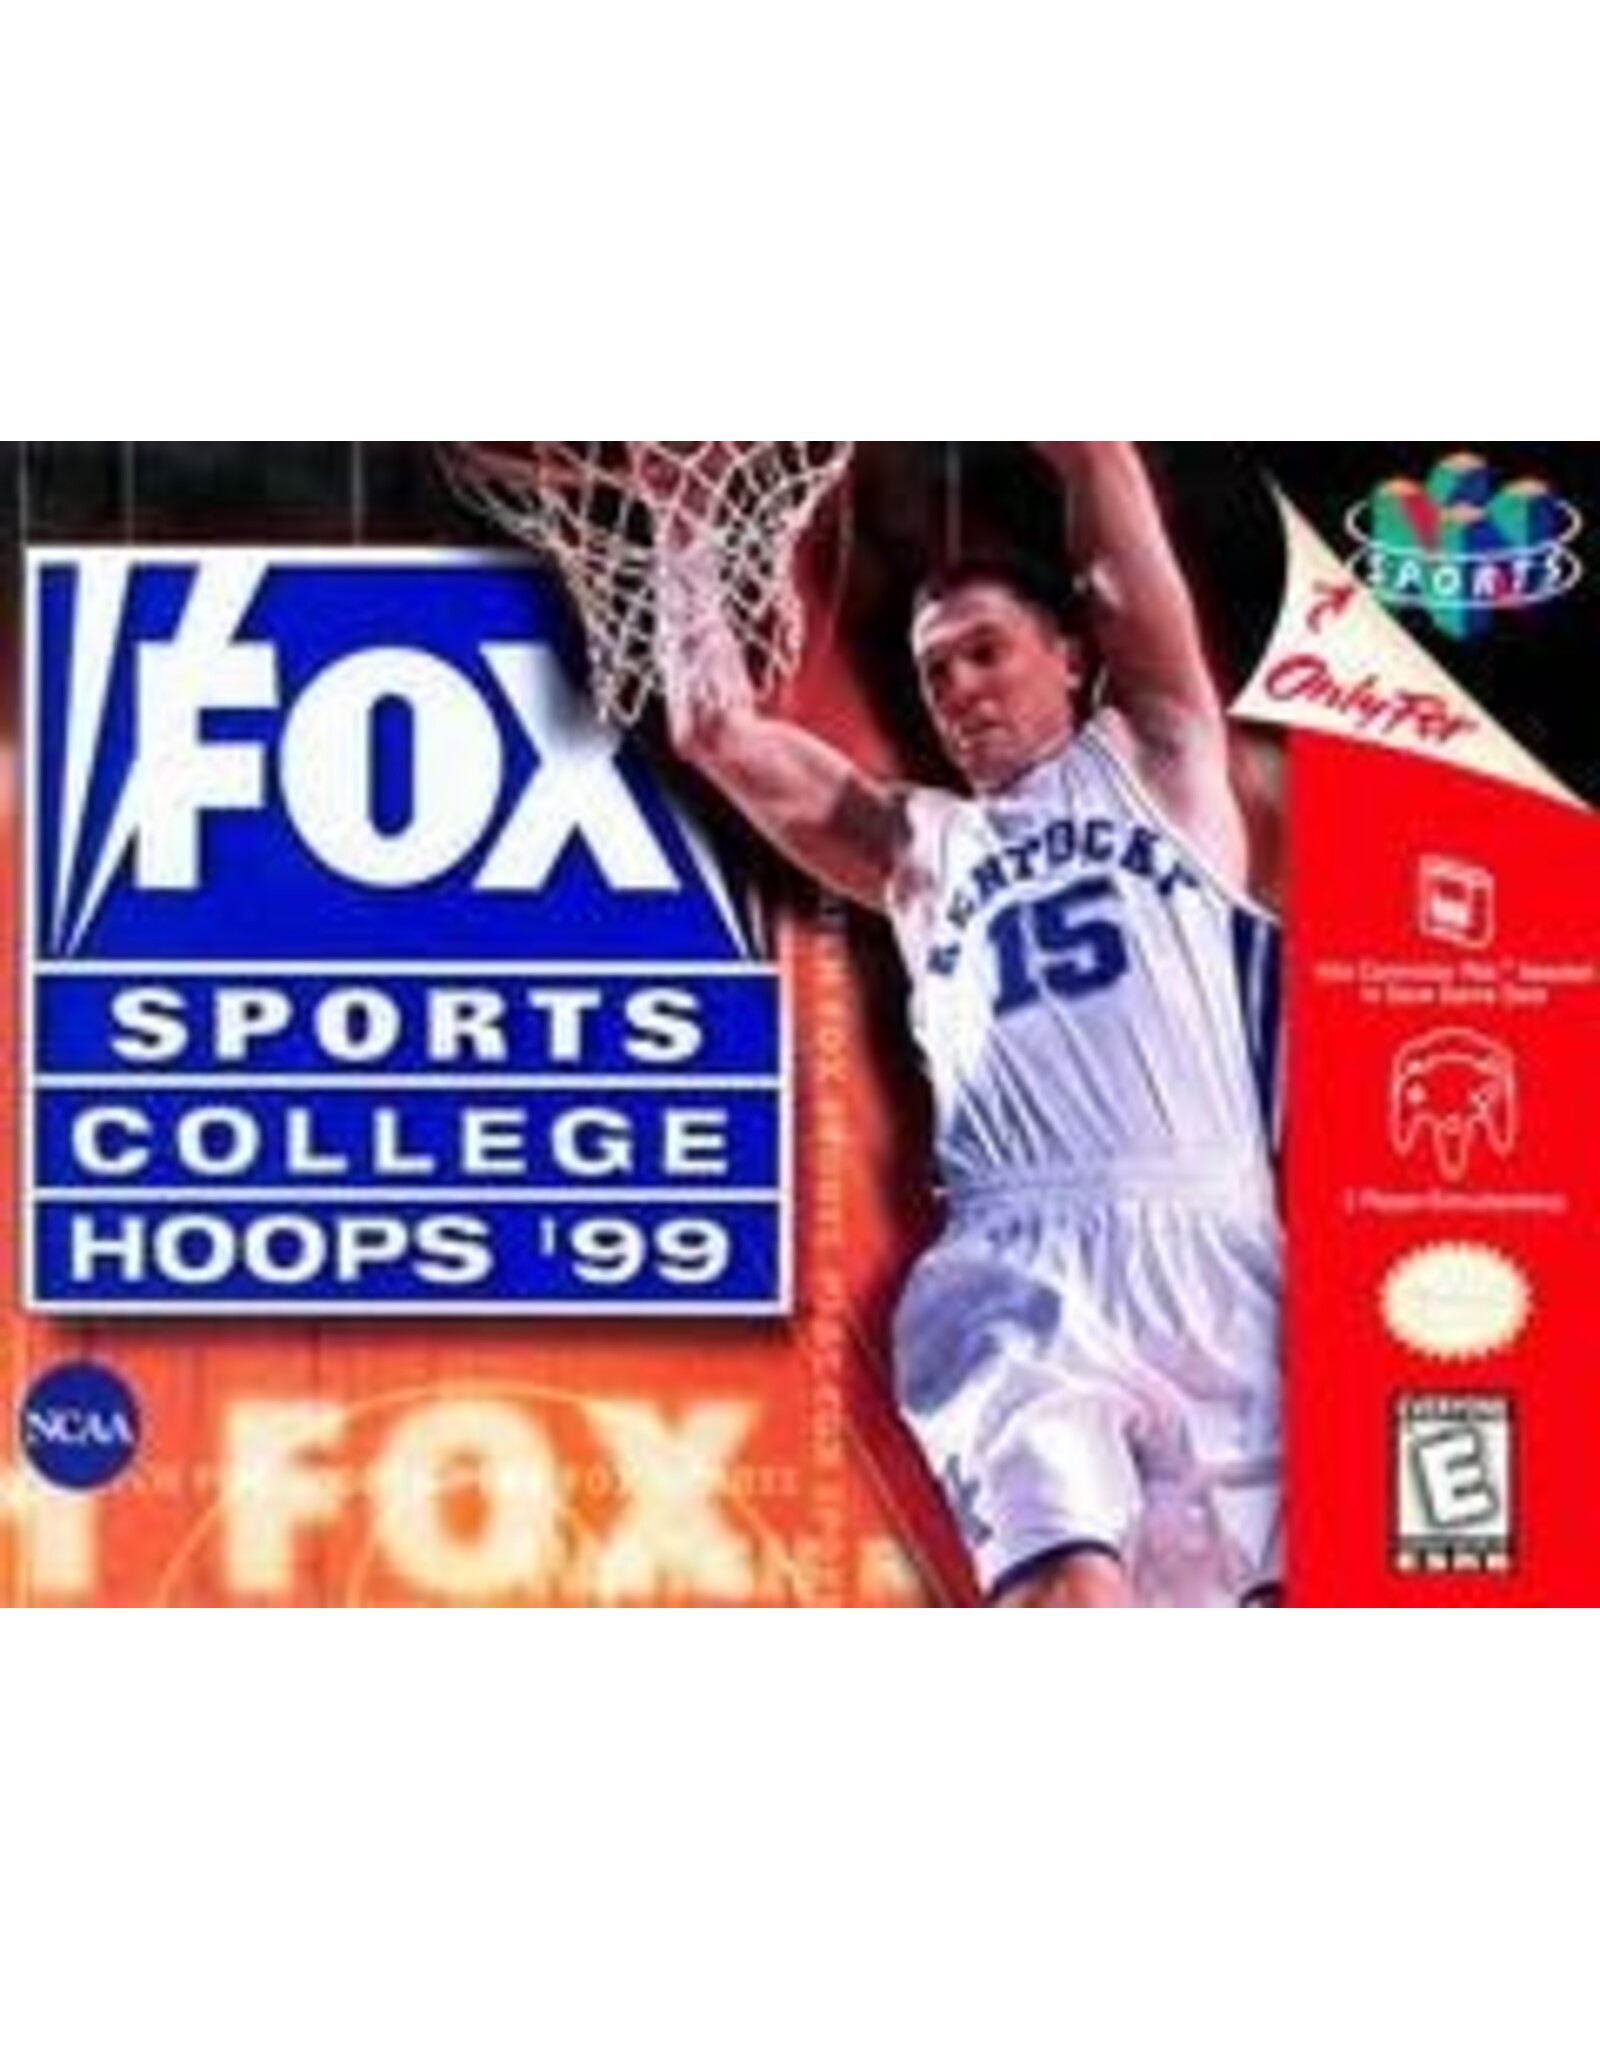 Nintendo 64 FOX Sports College Hoops '99 (Cart Only, Cosmetic Damage)